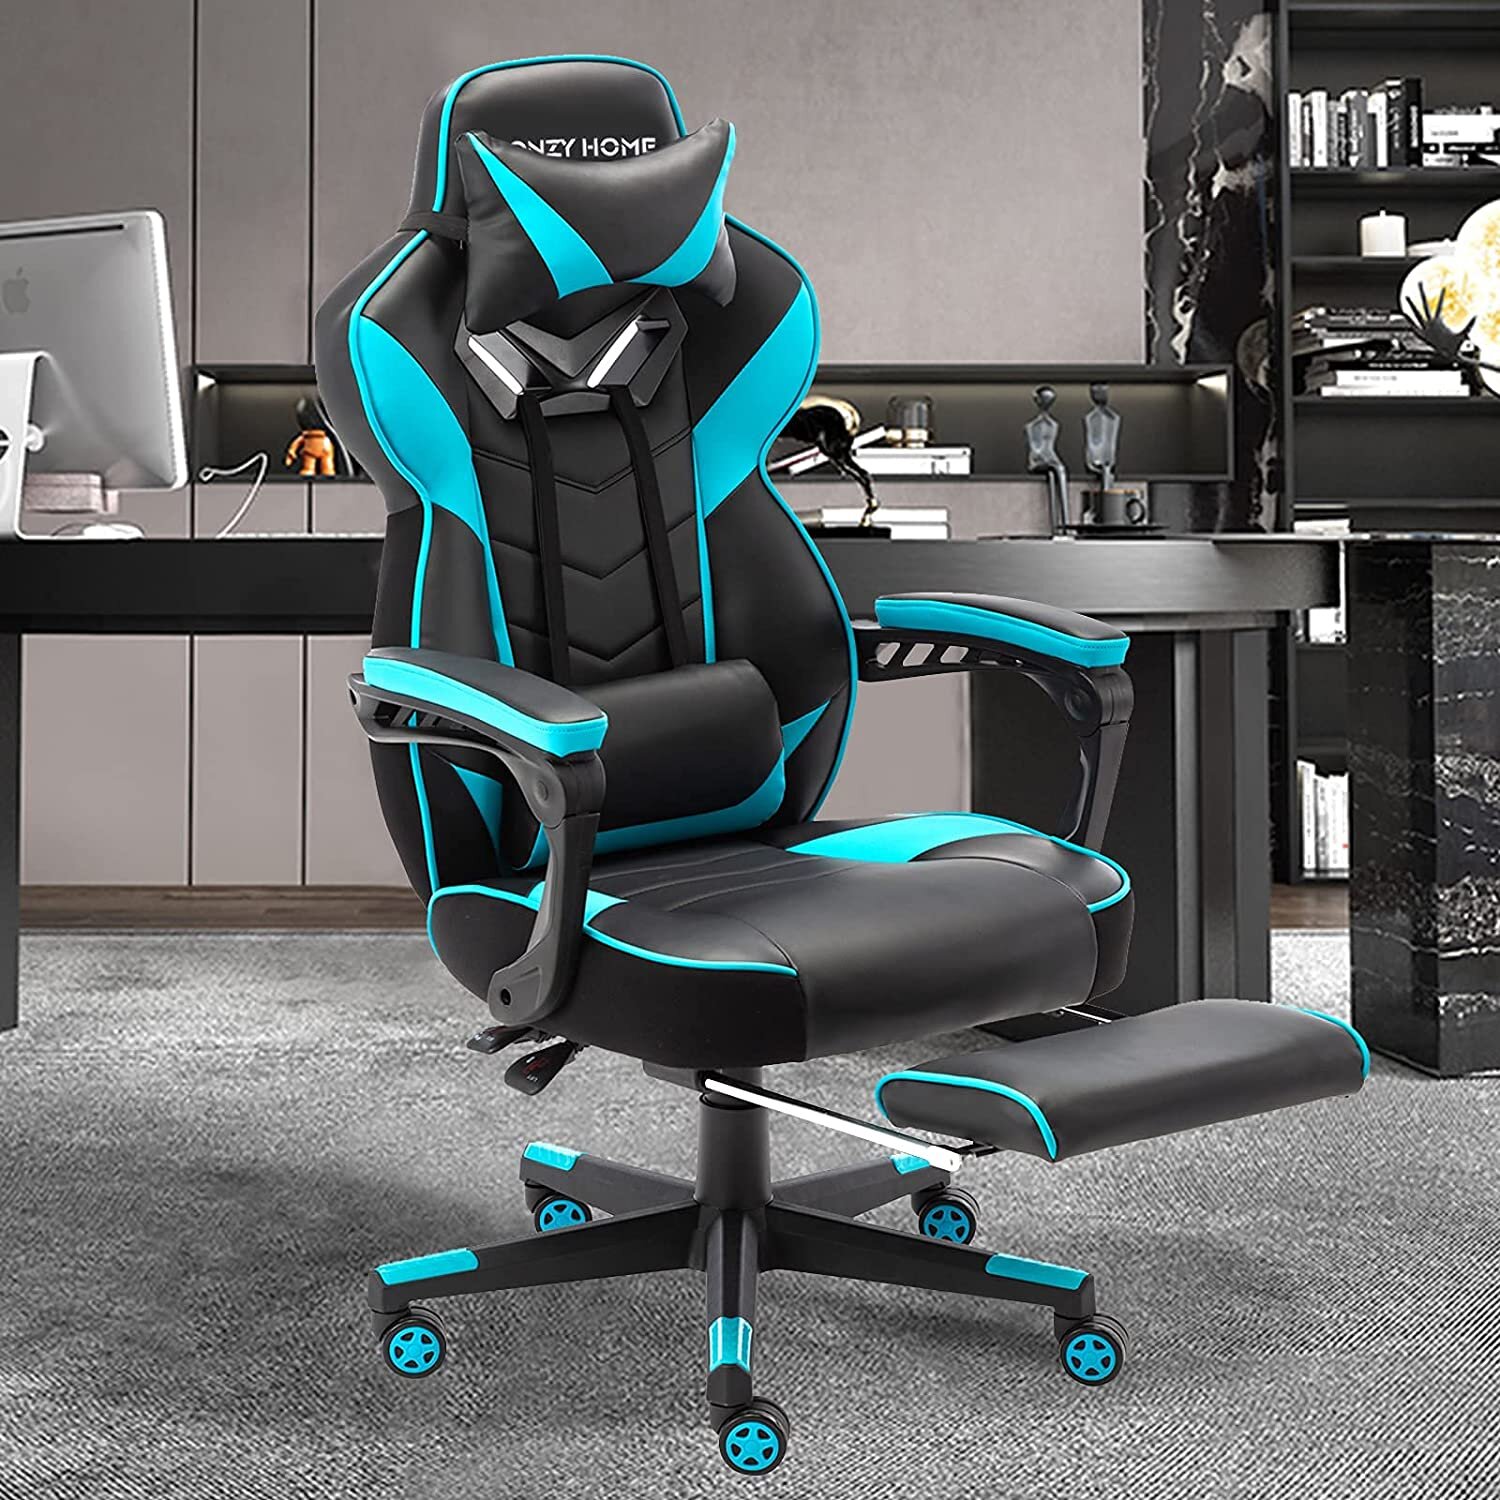 OFFICE CHAIR EXECUTIVE RACING GAMING SWIVEL COMPUTER DESK CHAIRS WITH FOOTREST 